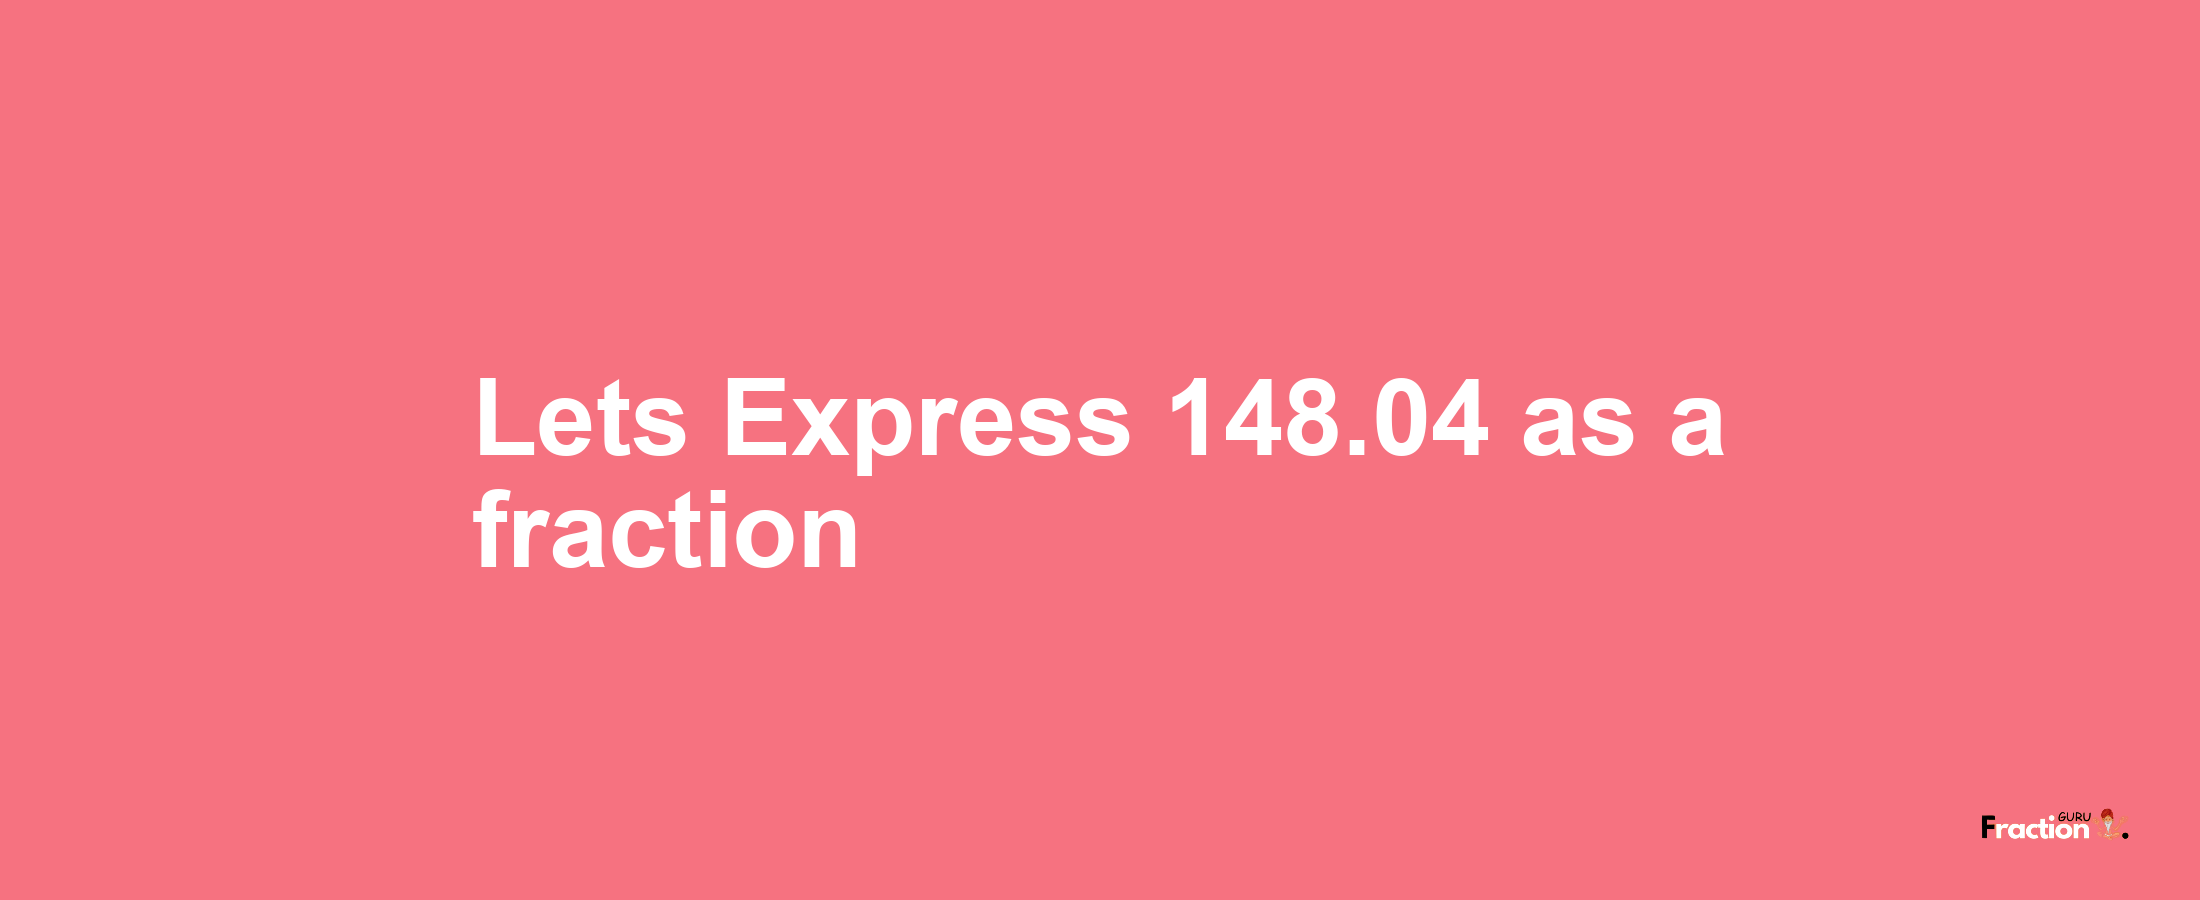 Lets Express 148.04 as afraction